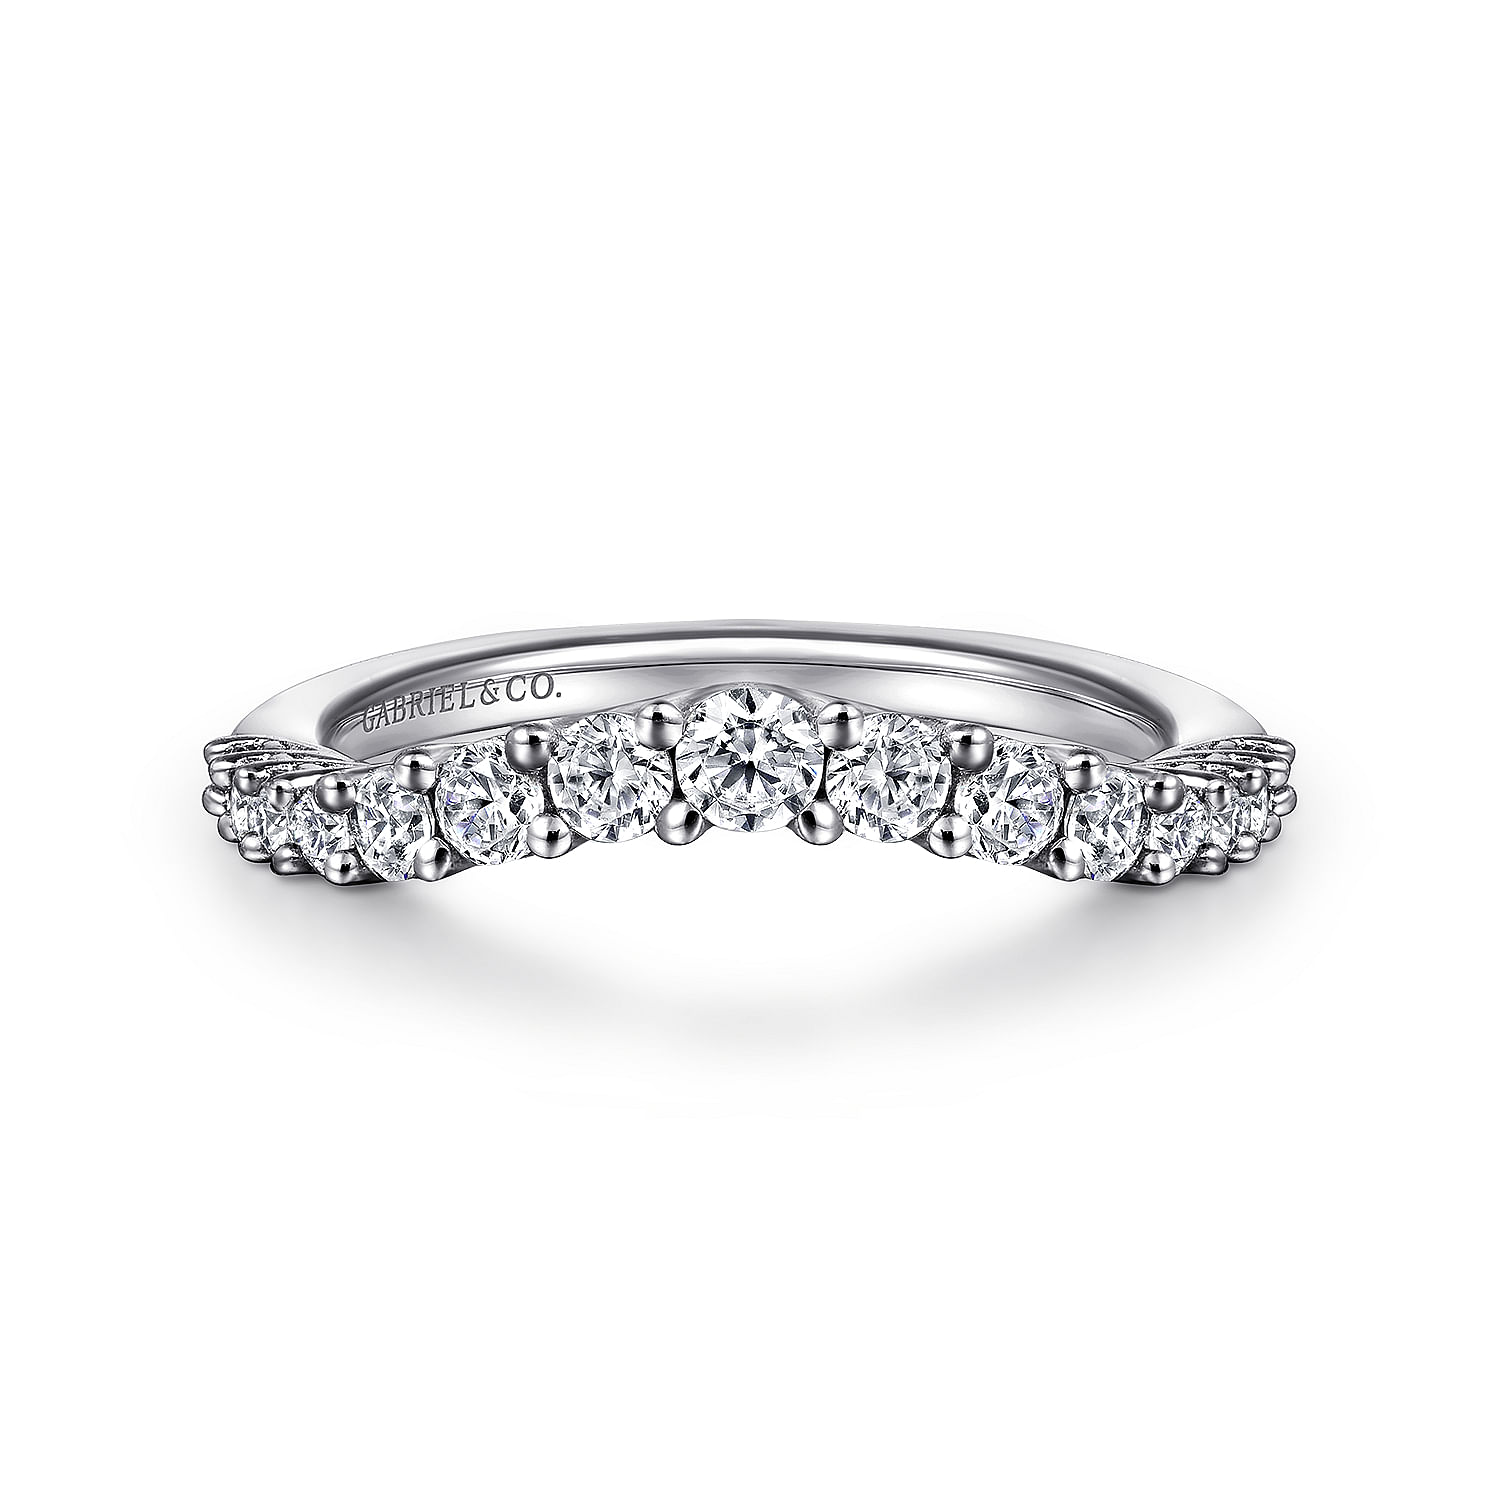 Soire - Curved 14K White Gold Shared Prong Diamond Wedding Band